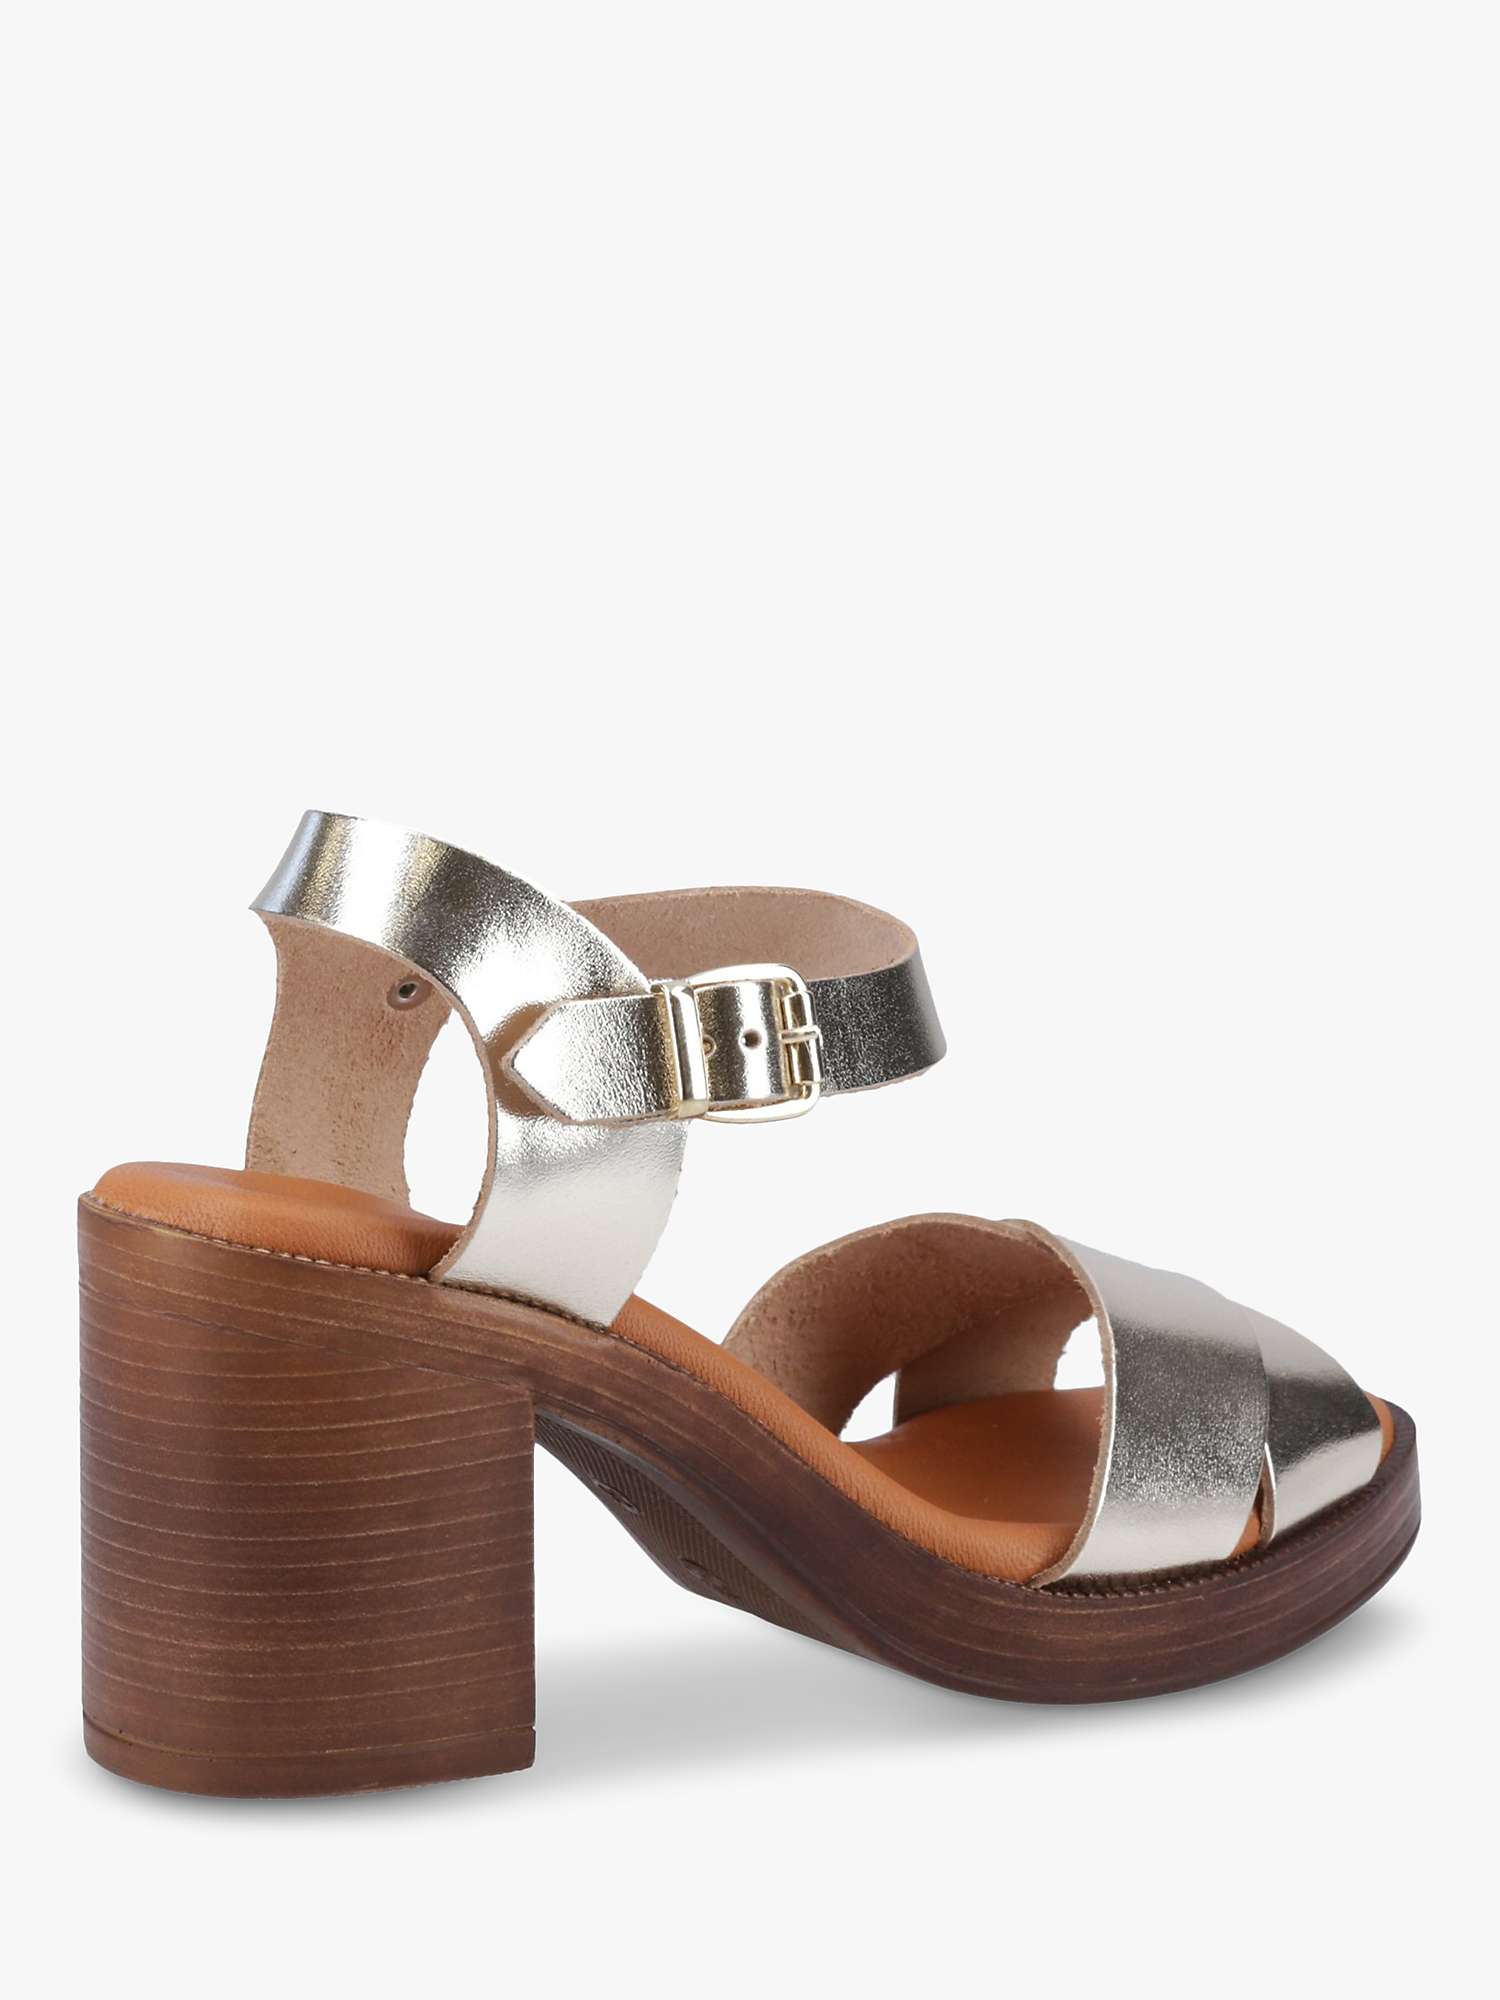 Buy Hush Puppies Georgia Leather Buckle Sandal, Gold Online at johnlewis.com